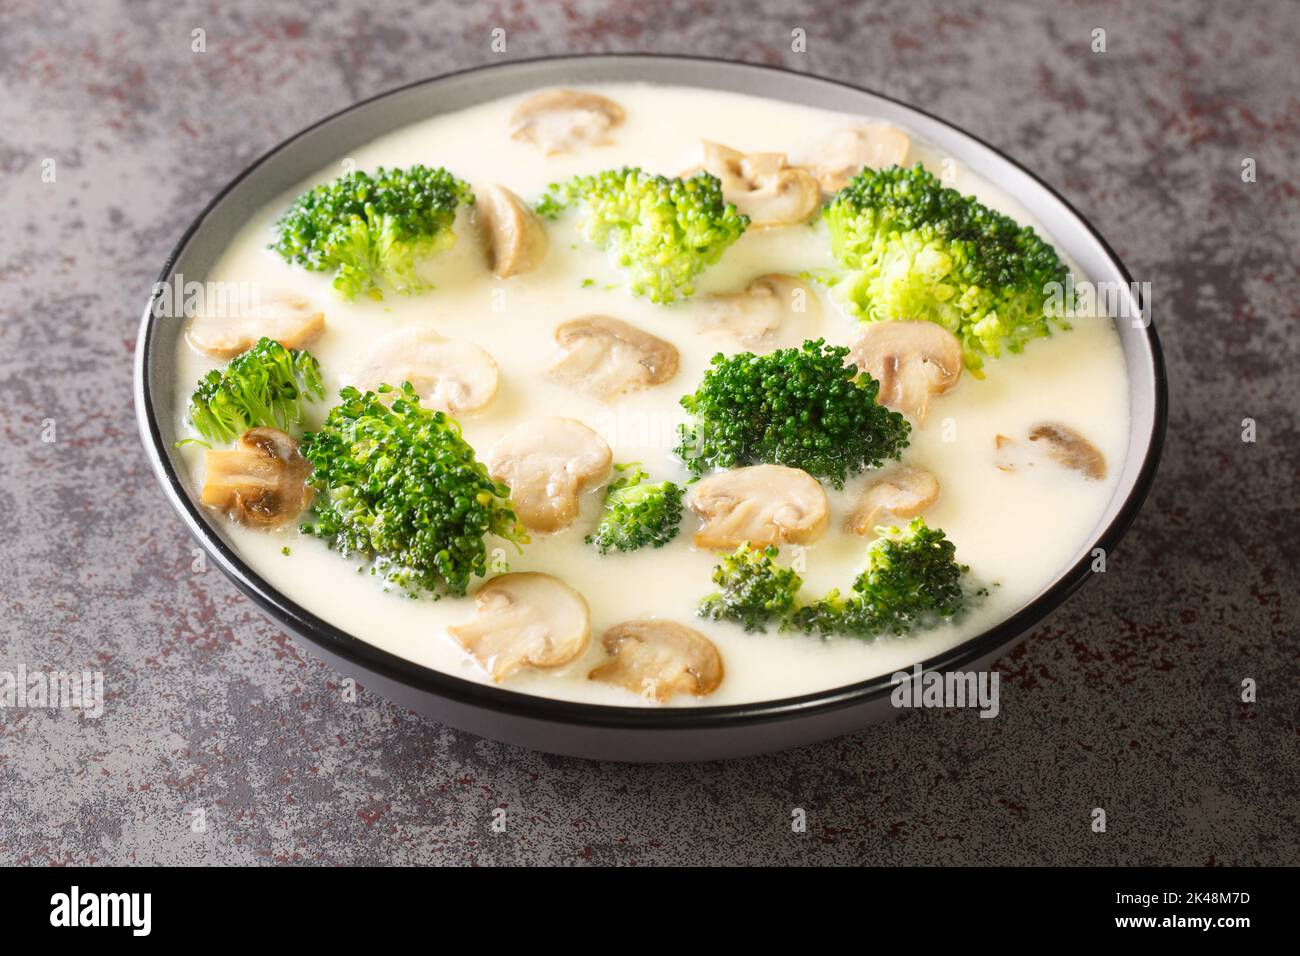 Thick fragrant cream soup with broccoli and champignon mushrooms close-up in a bowl on the table. Horizontal Stock Photo